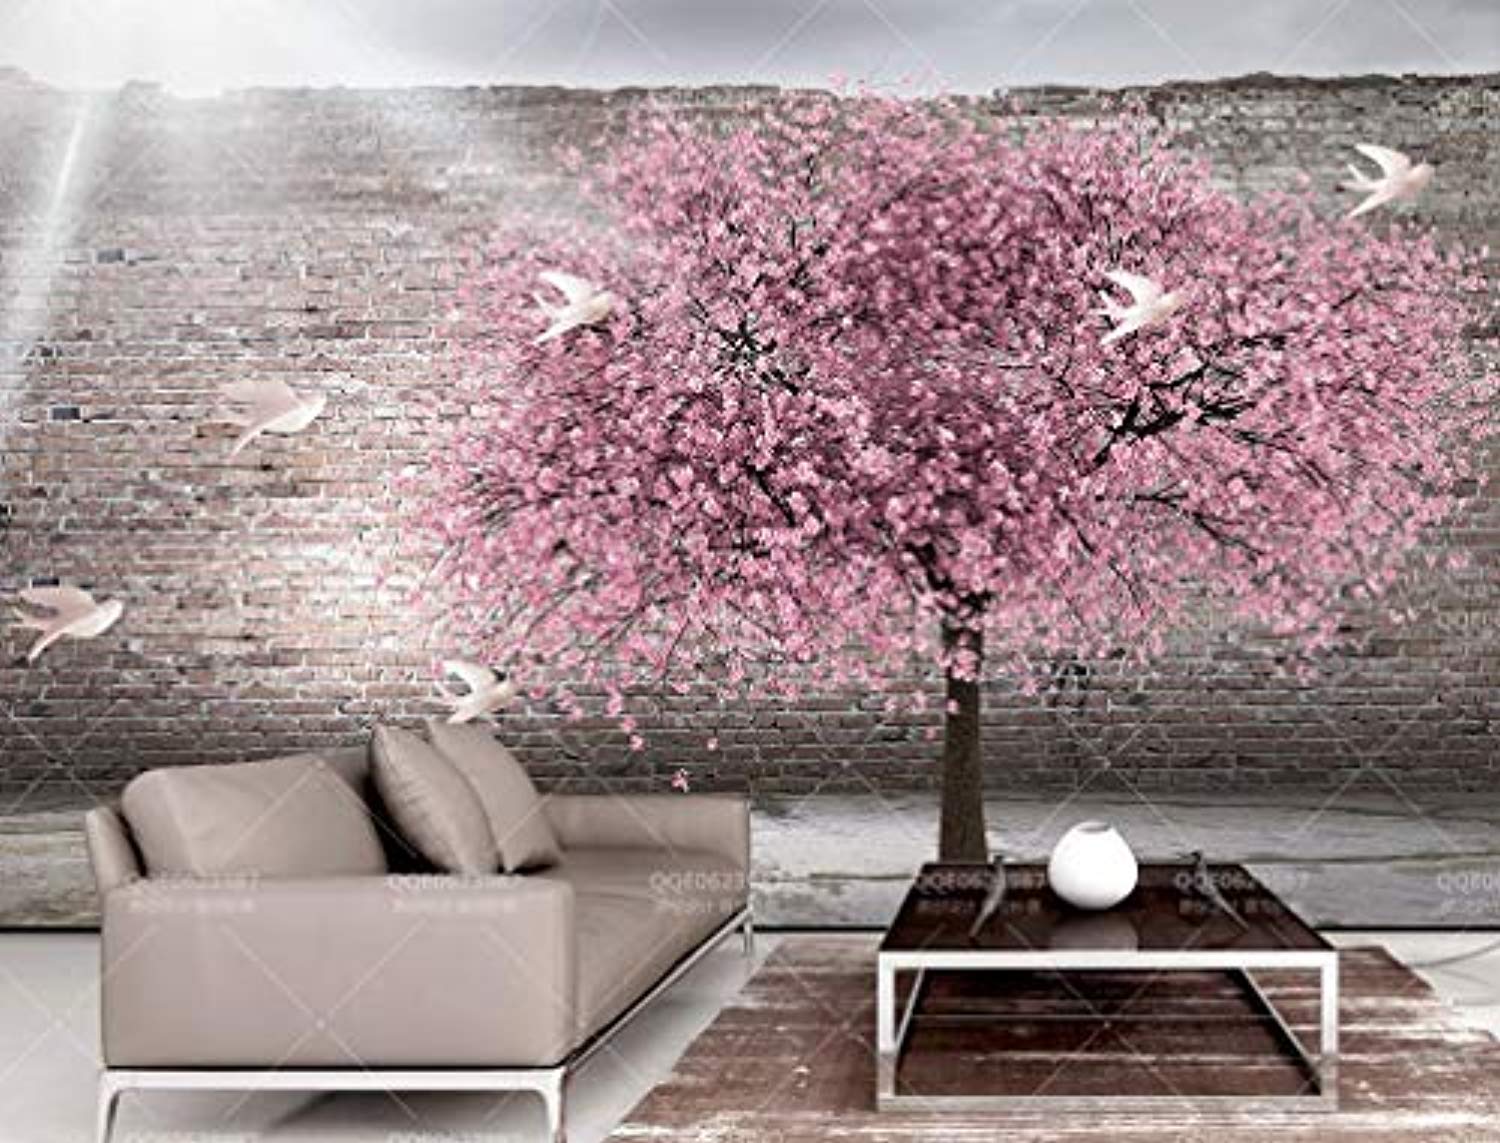 Pink Mural Wallpaper Designs to Spruce Up Your Home